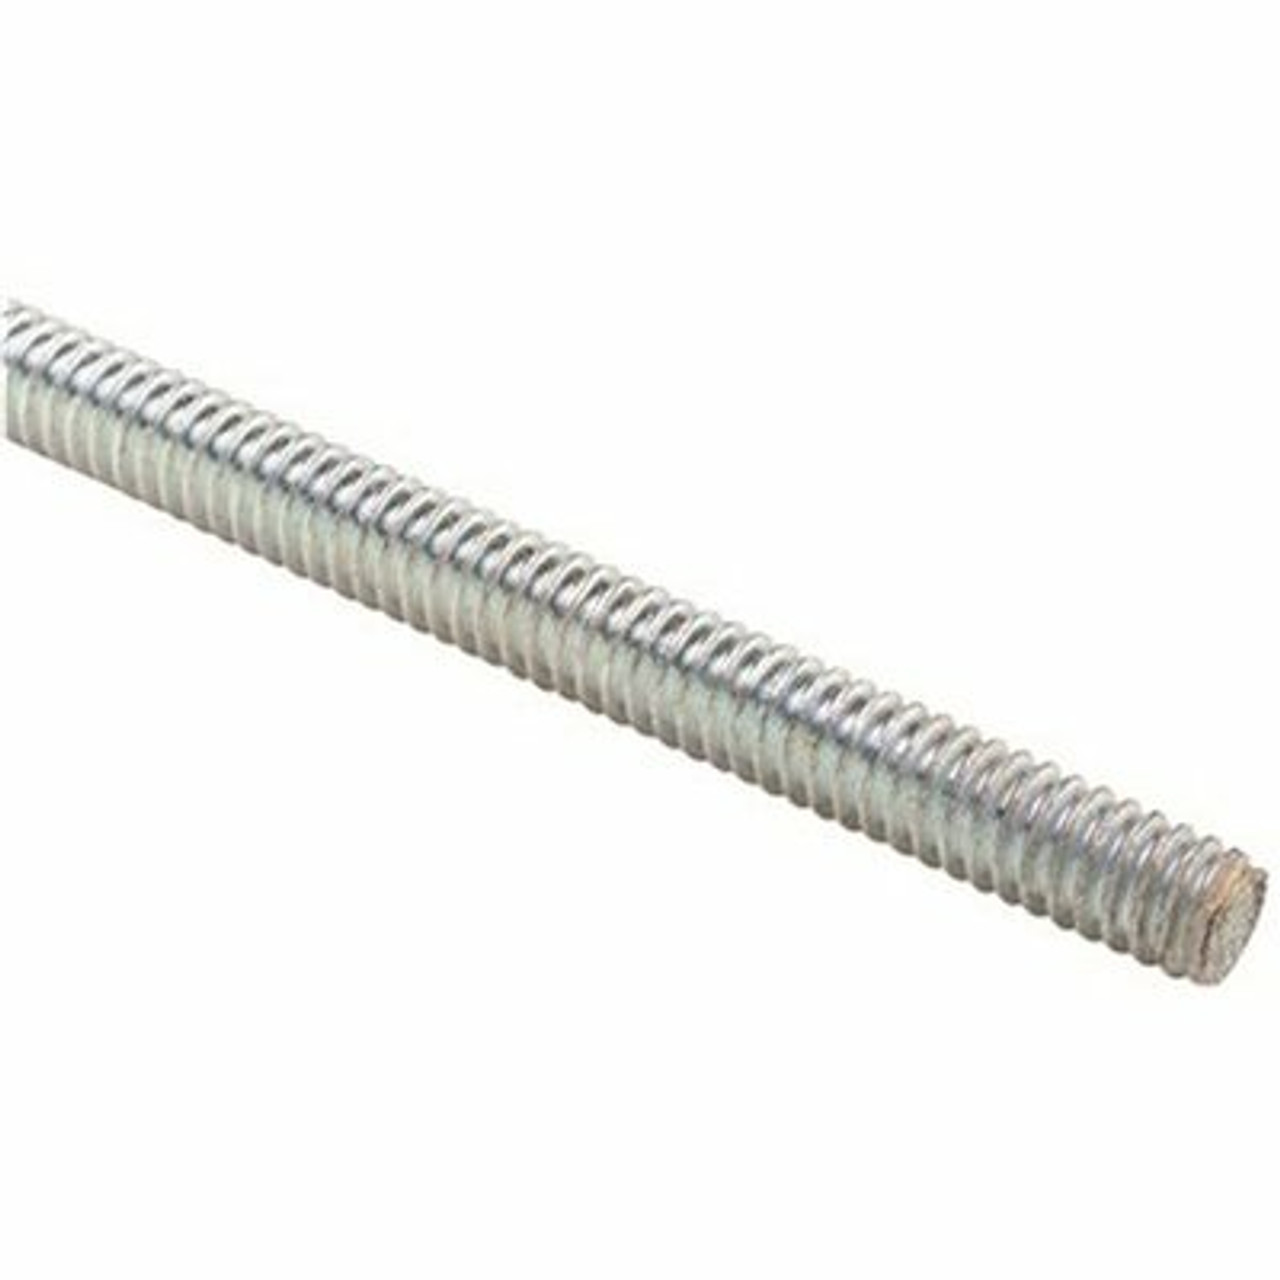 Superstrut 3/8 In. X 10 Ft. Galvanized Threaded Electrical Support Rod